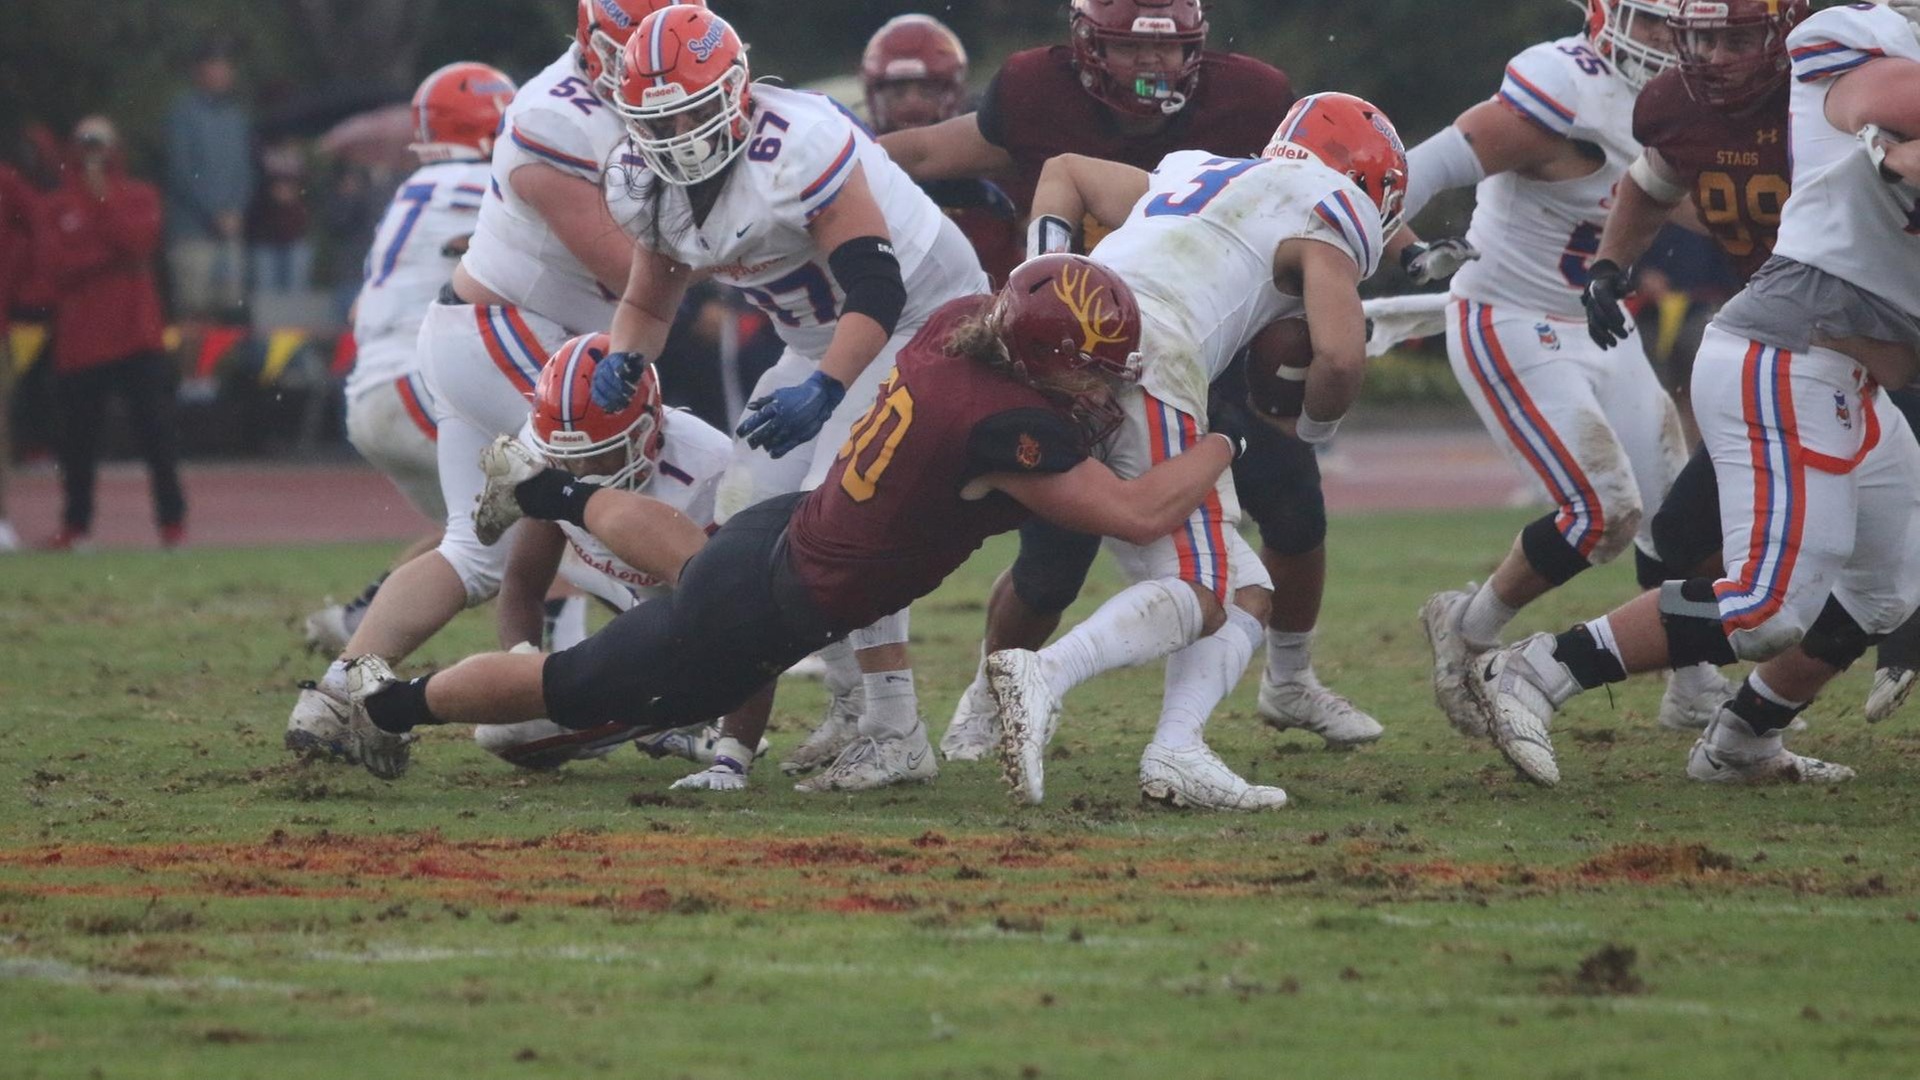 Joey Asta led the CMS defense with eight tackles (photo by Eva Fernandez)